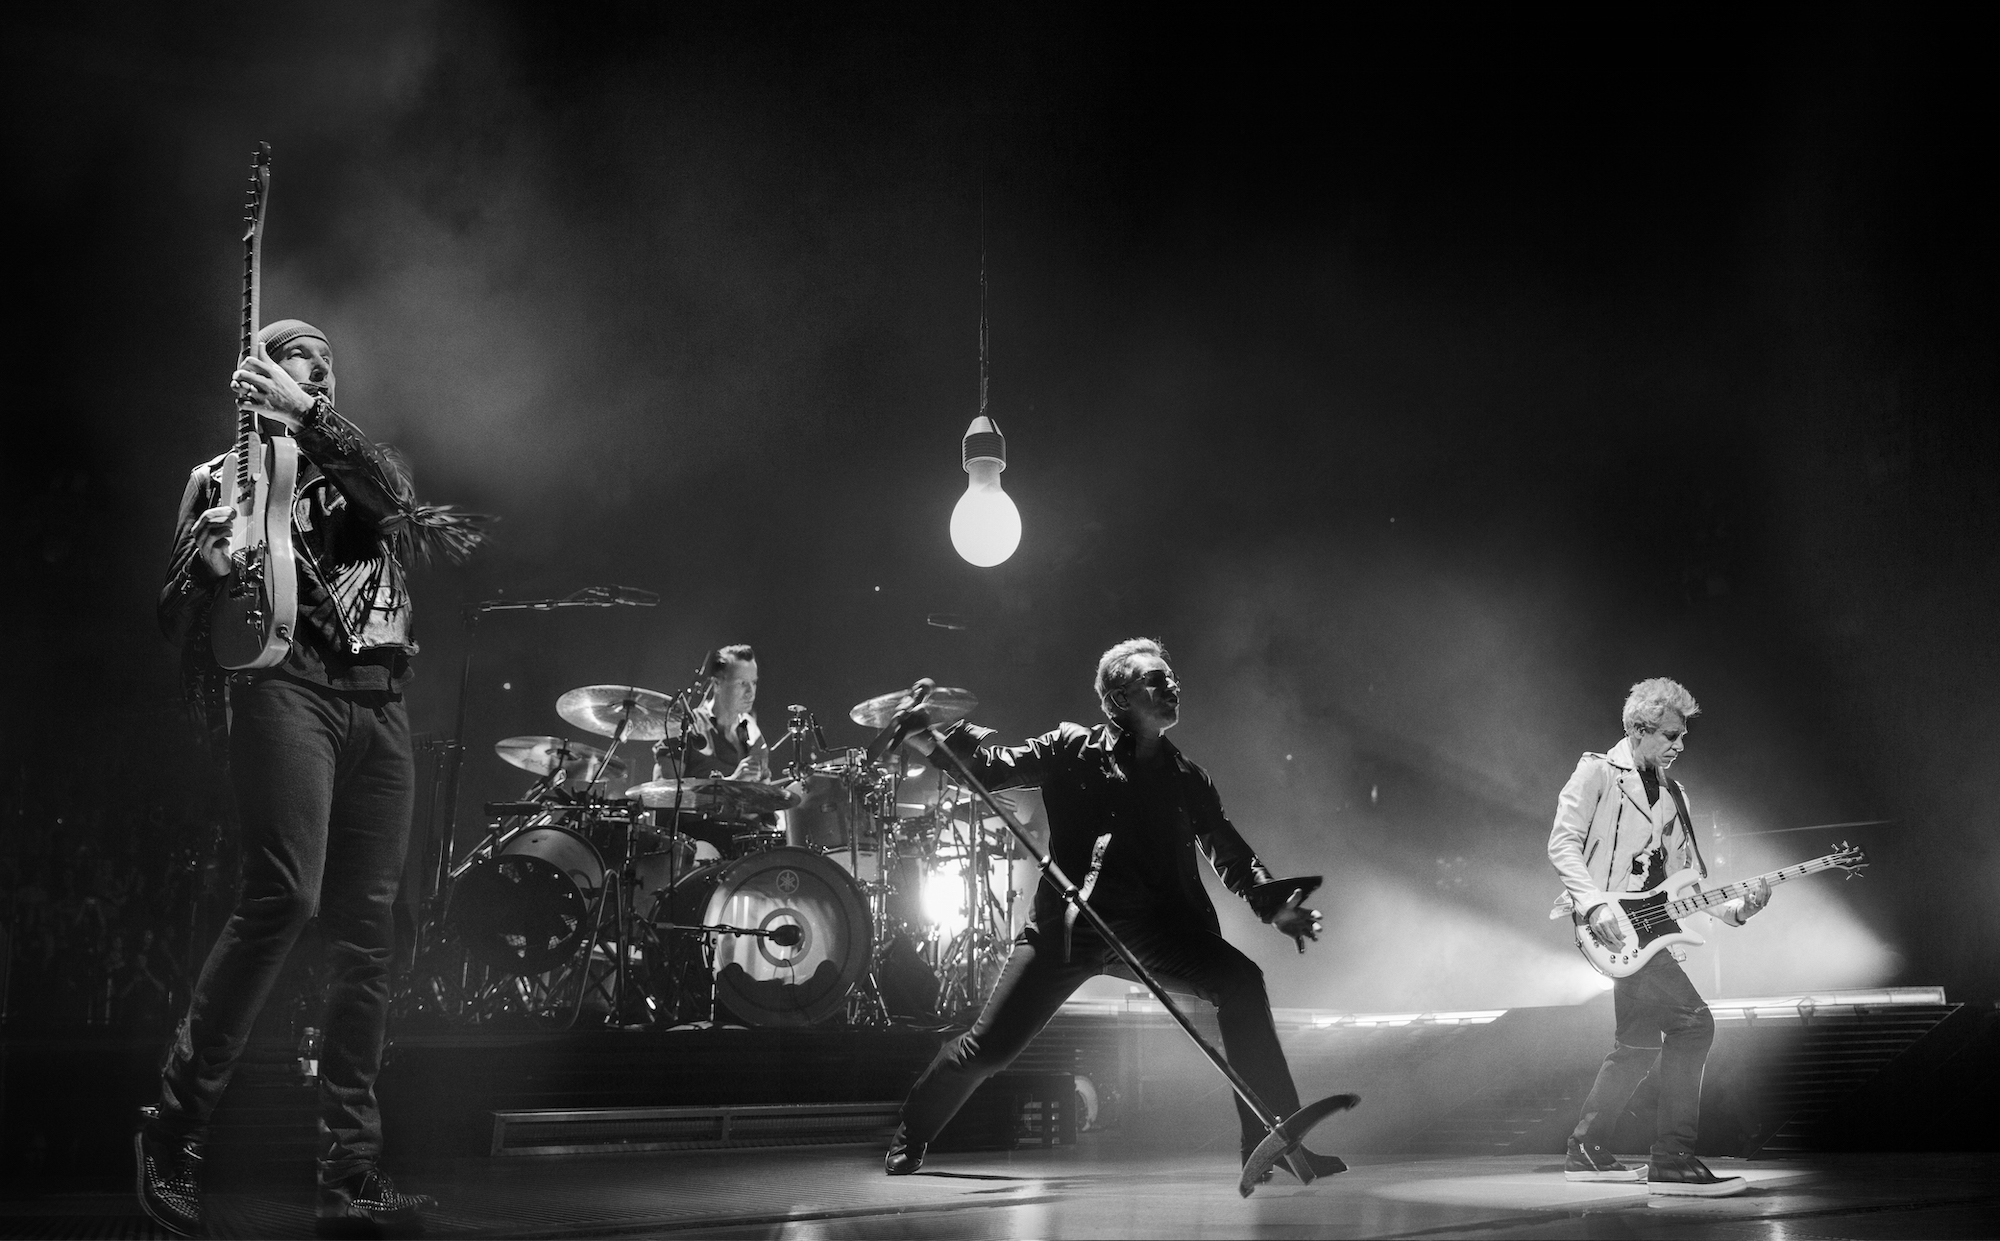 U2 at Sphere takes live music to a new dimension